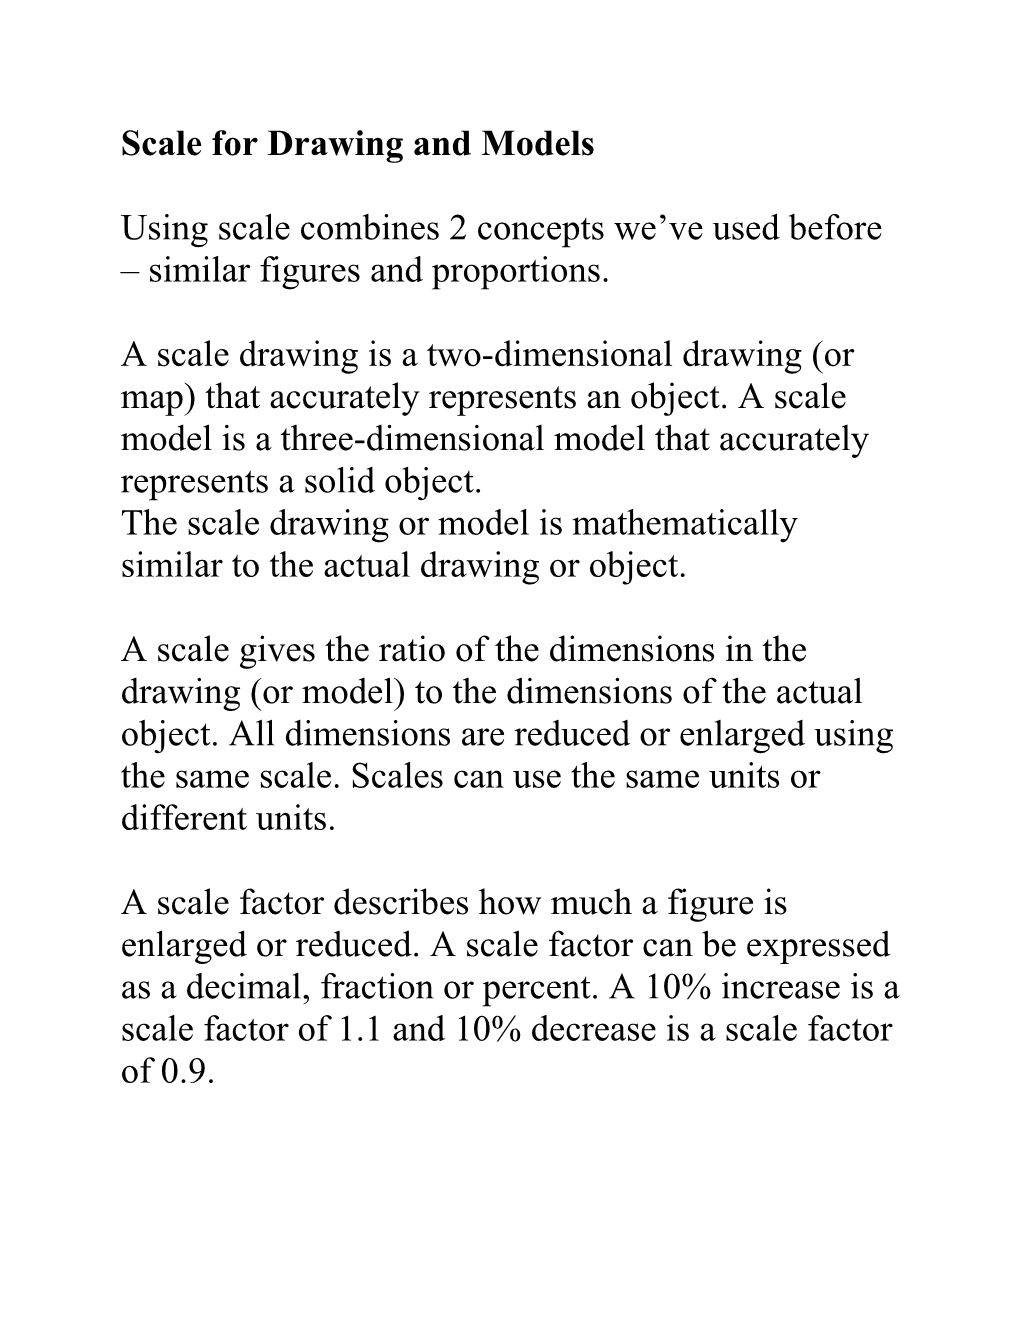 Scale for Drawing and Models